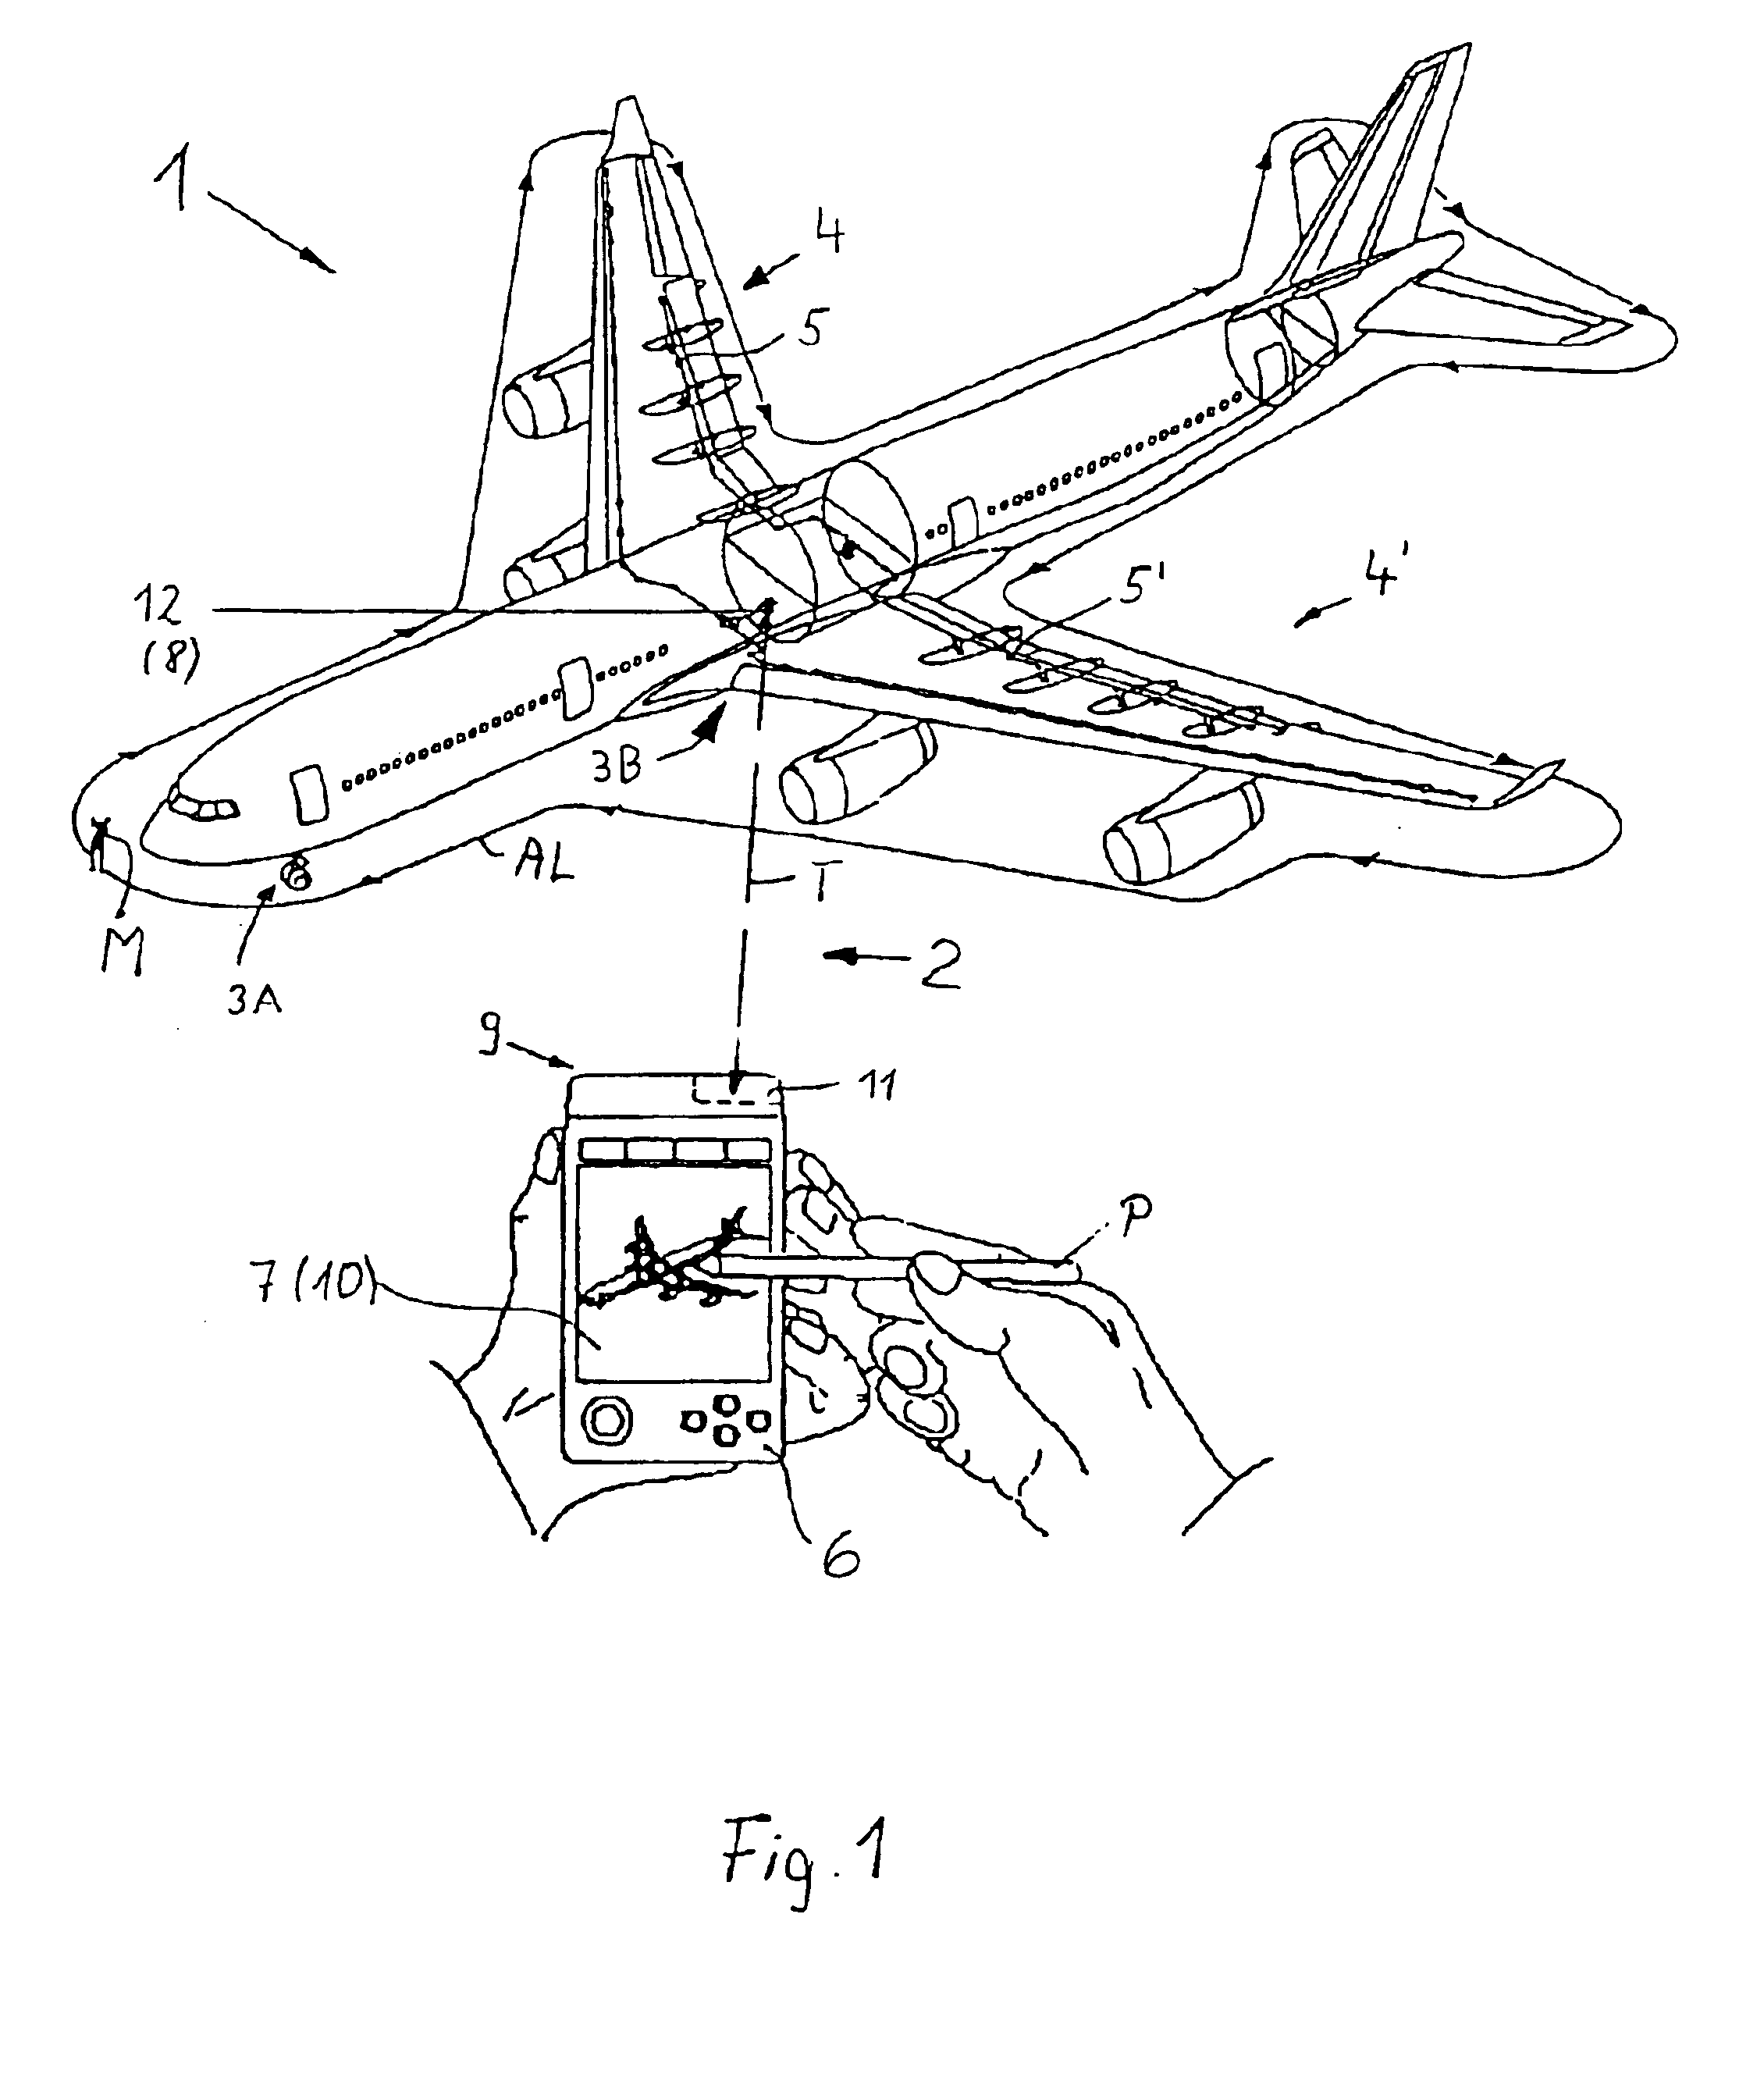 System and method for diagnosing aircraft components for maintenance purposes